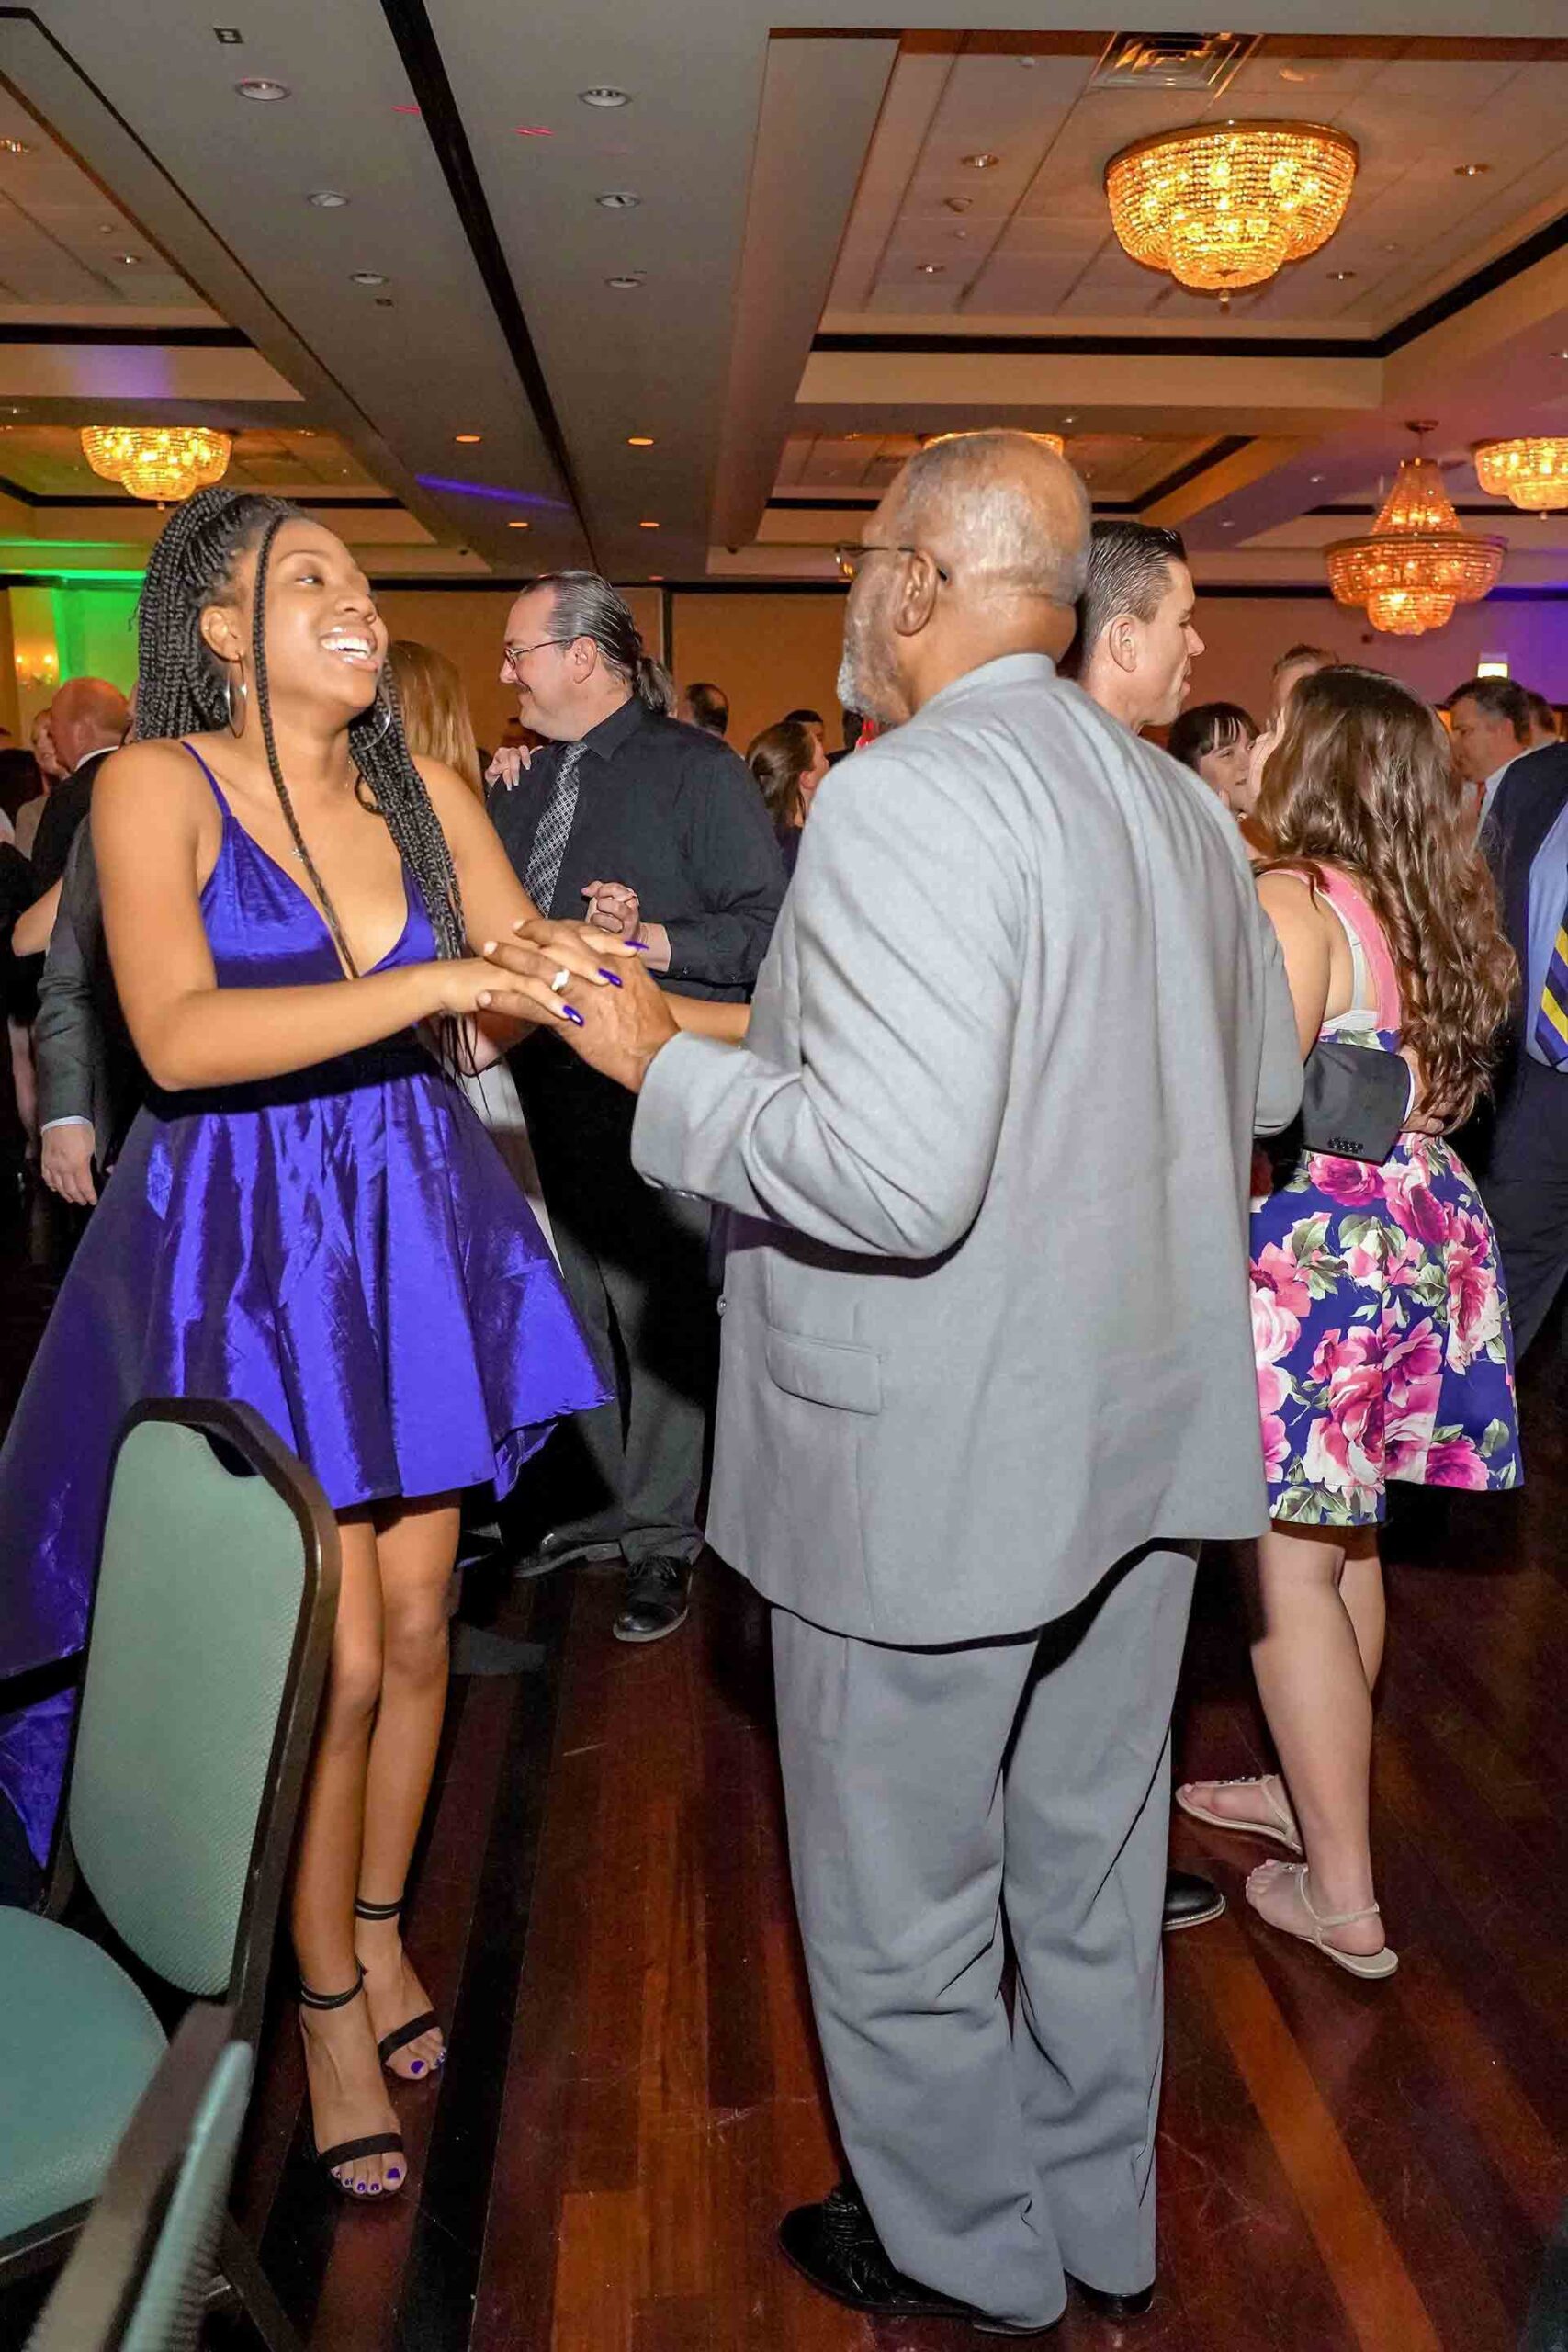 father-daughter-dance-2019-girl-with-purple-dress-dancing-with-father